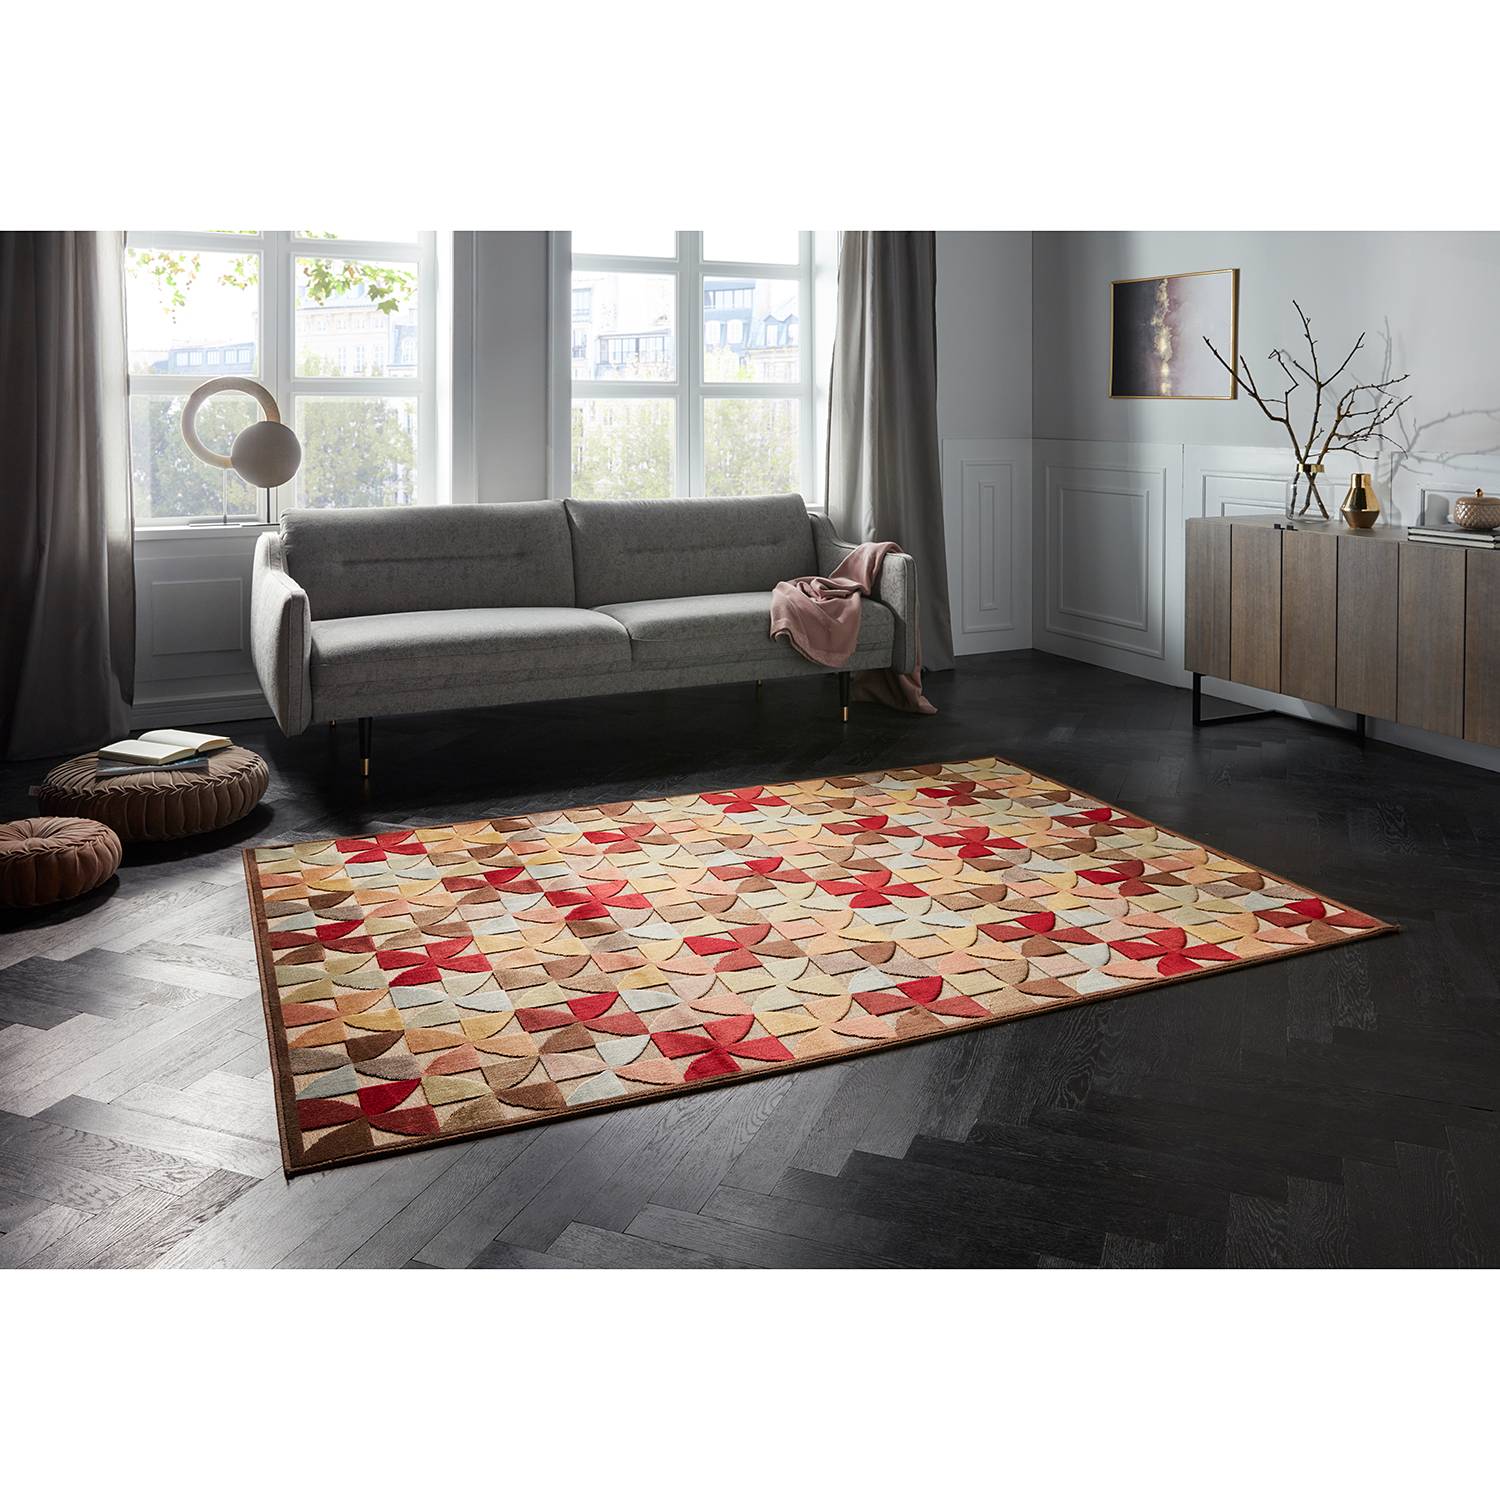 Image of Tapis Ailette 000000001000193682